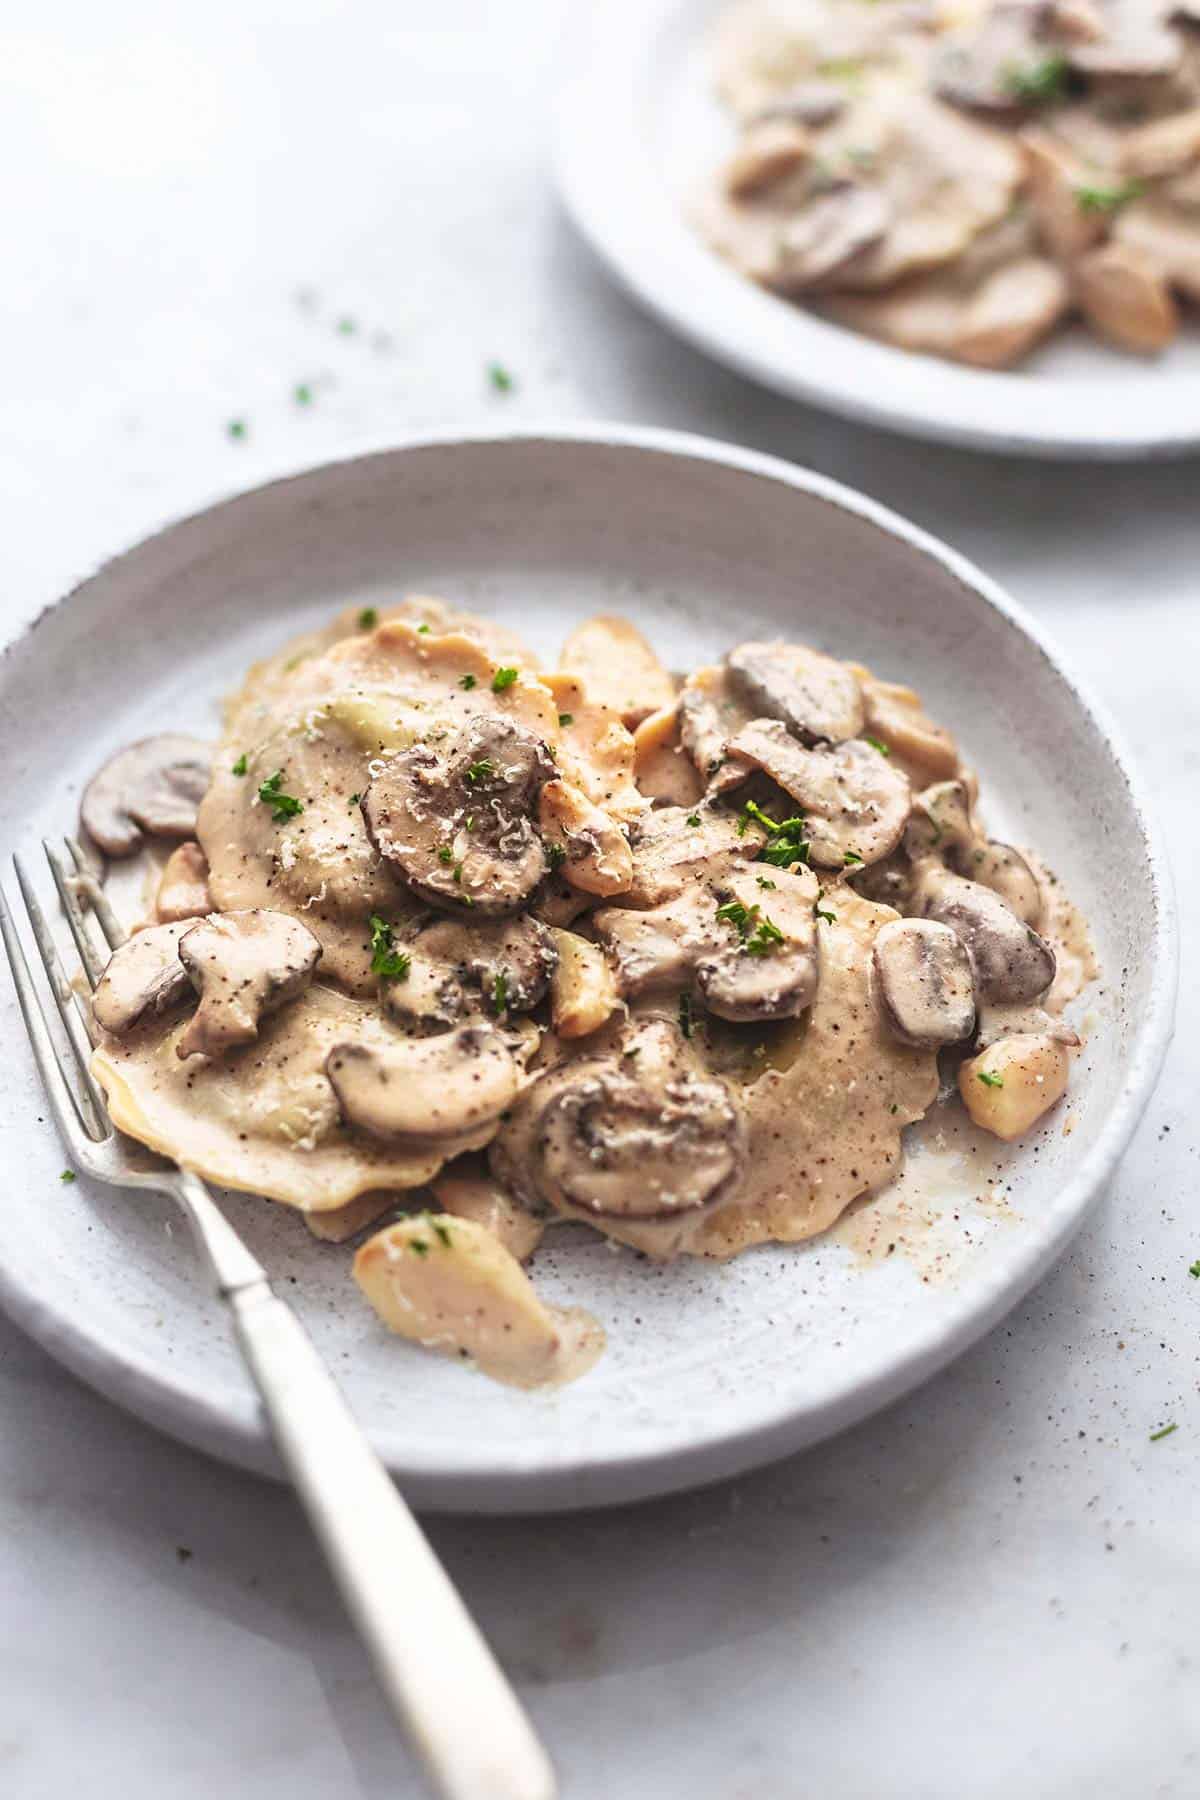 ravioli with mushroom cream sauce on a white plate with a fork.